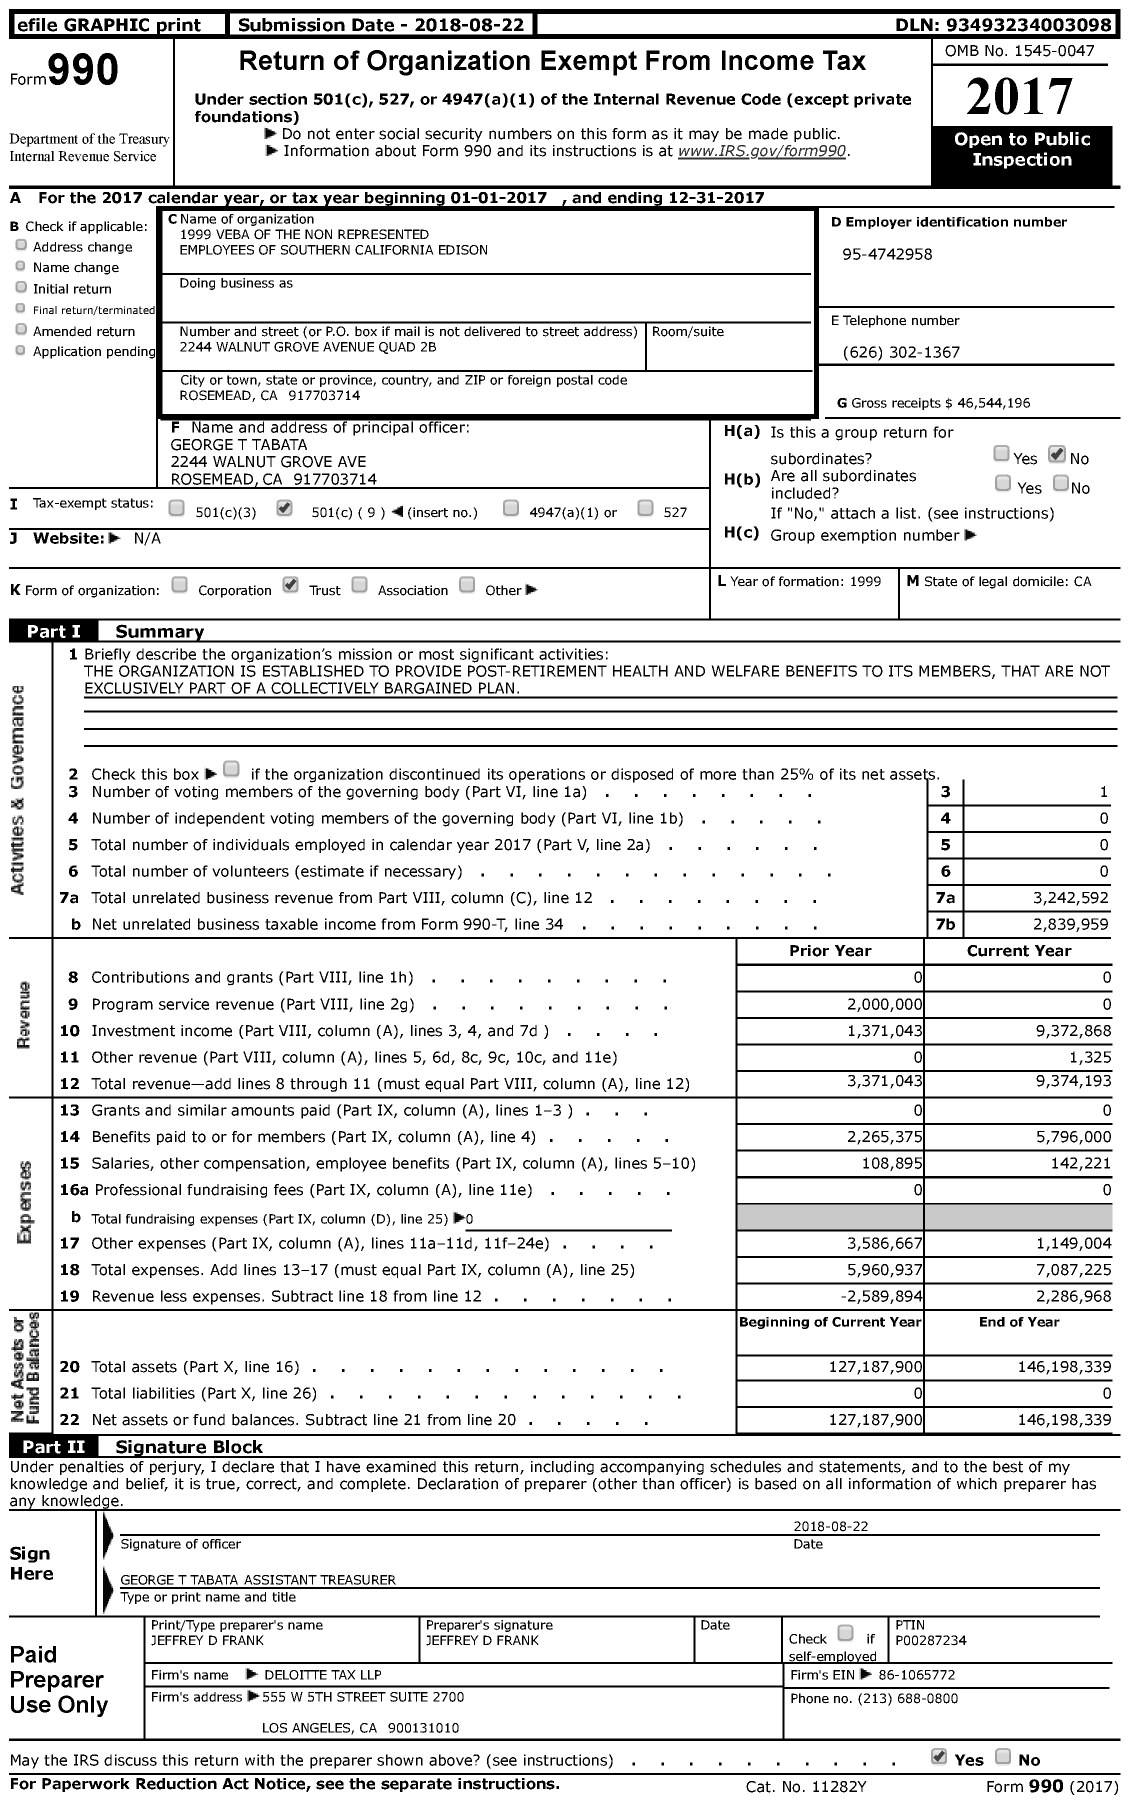 Image of first page of 2017 Form 990 for 1999 Veba of the Non Represented Employees of Southern California Edison